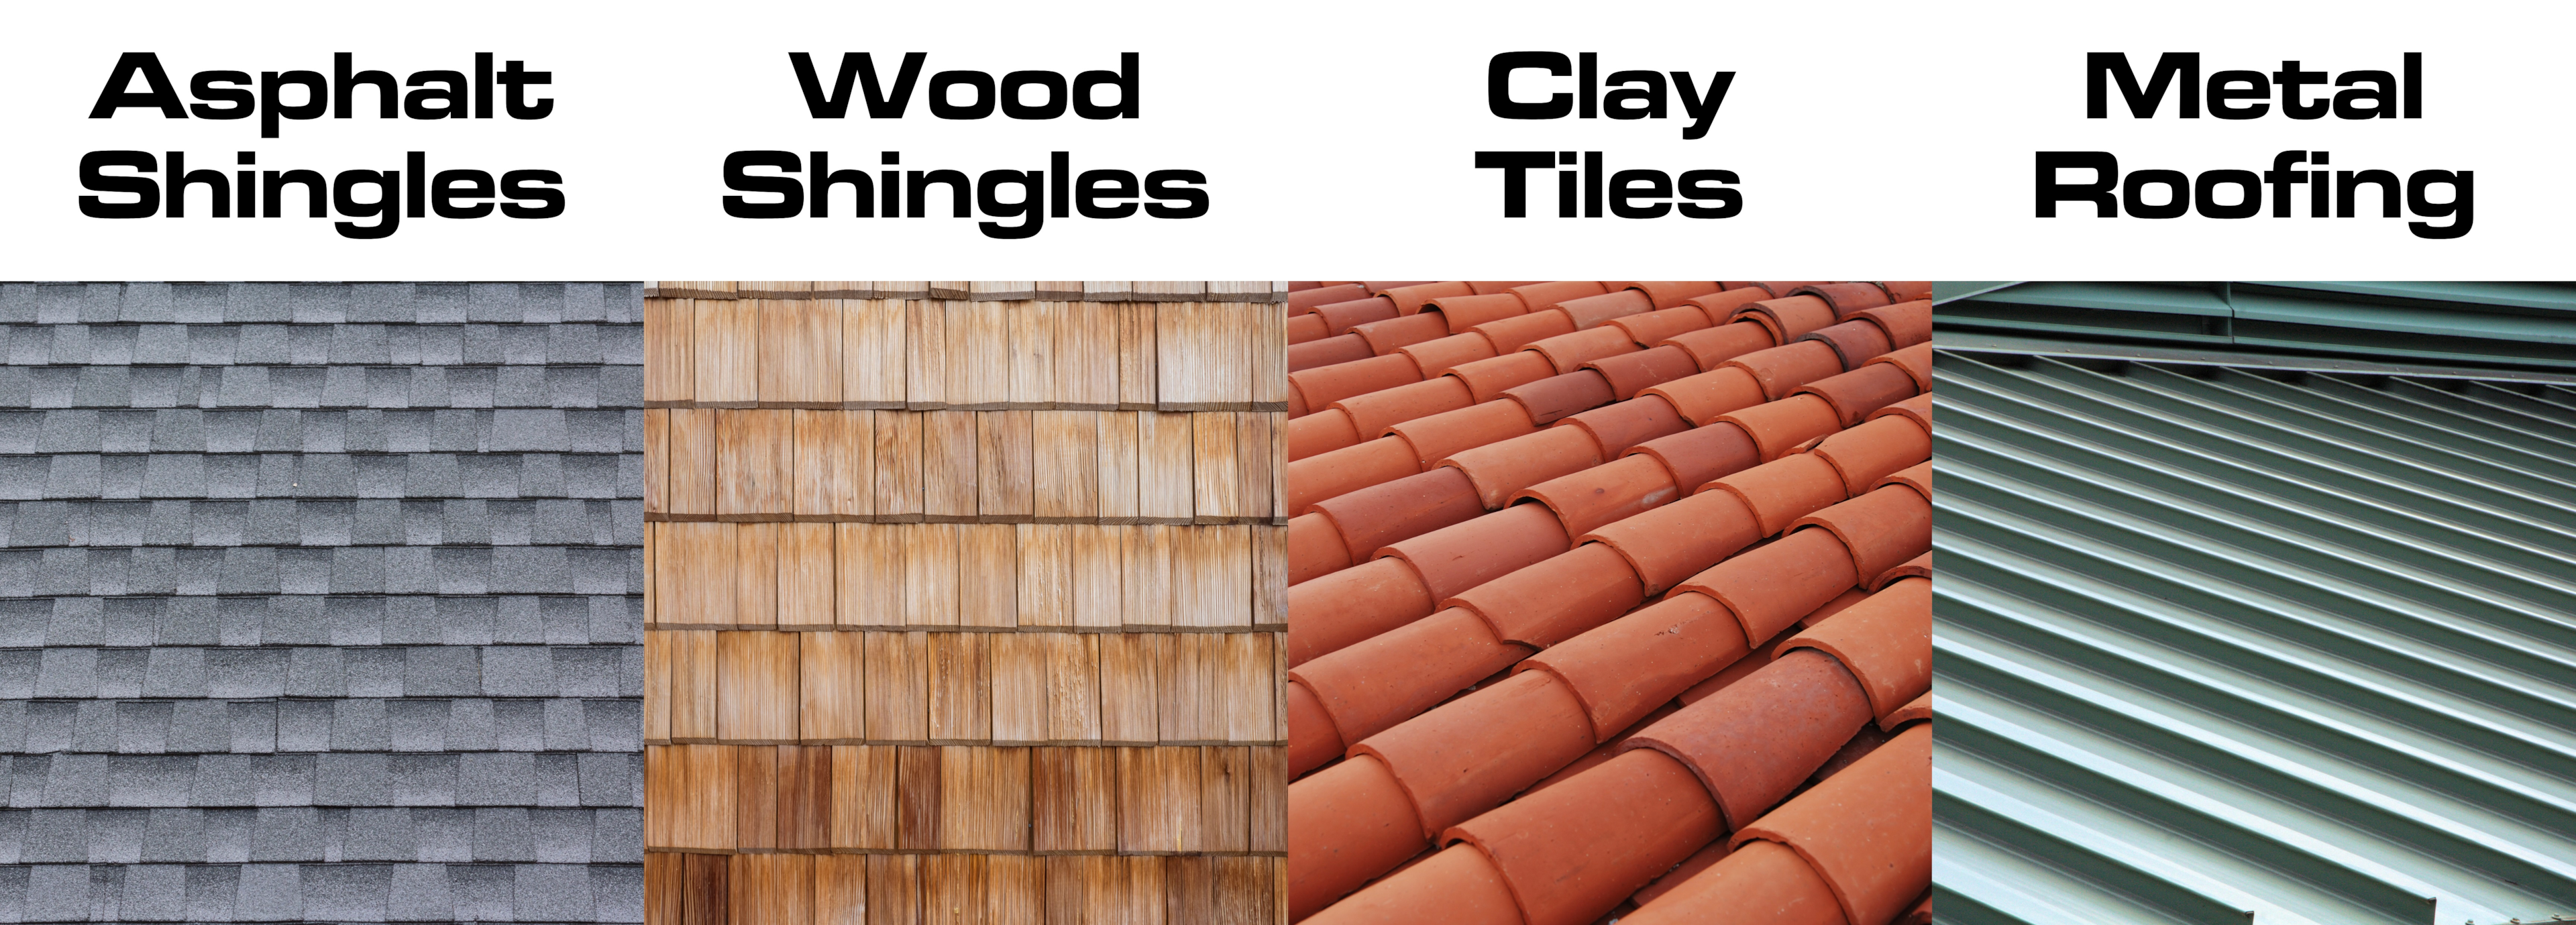 Examples of Different Types of Roofing Materials